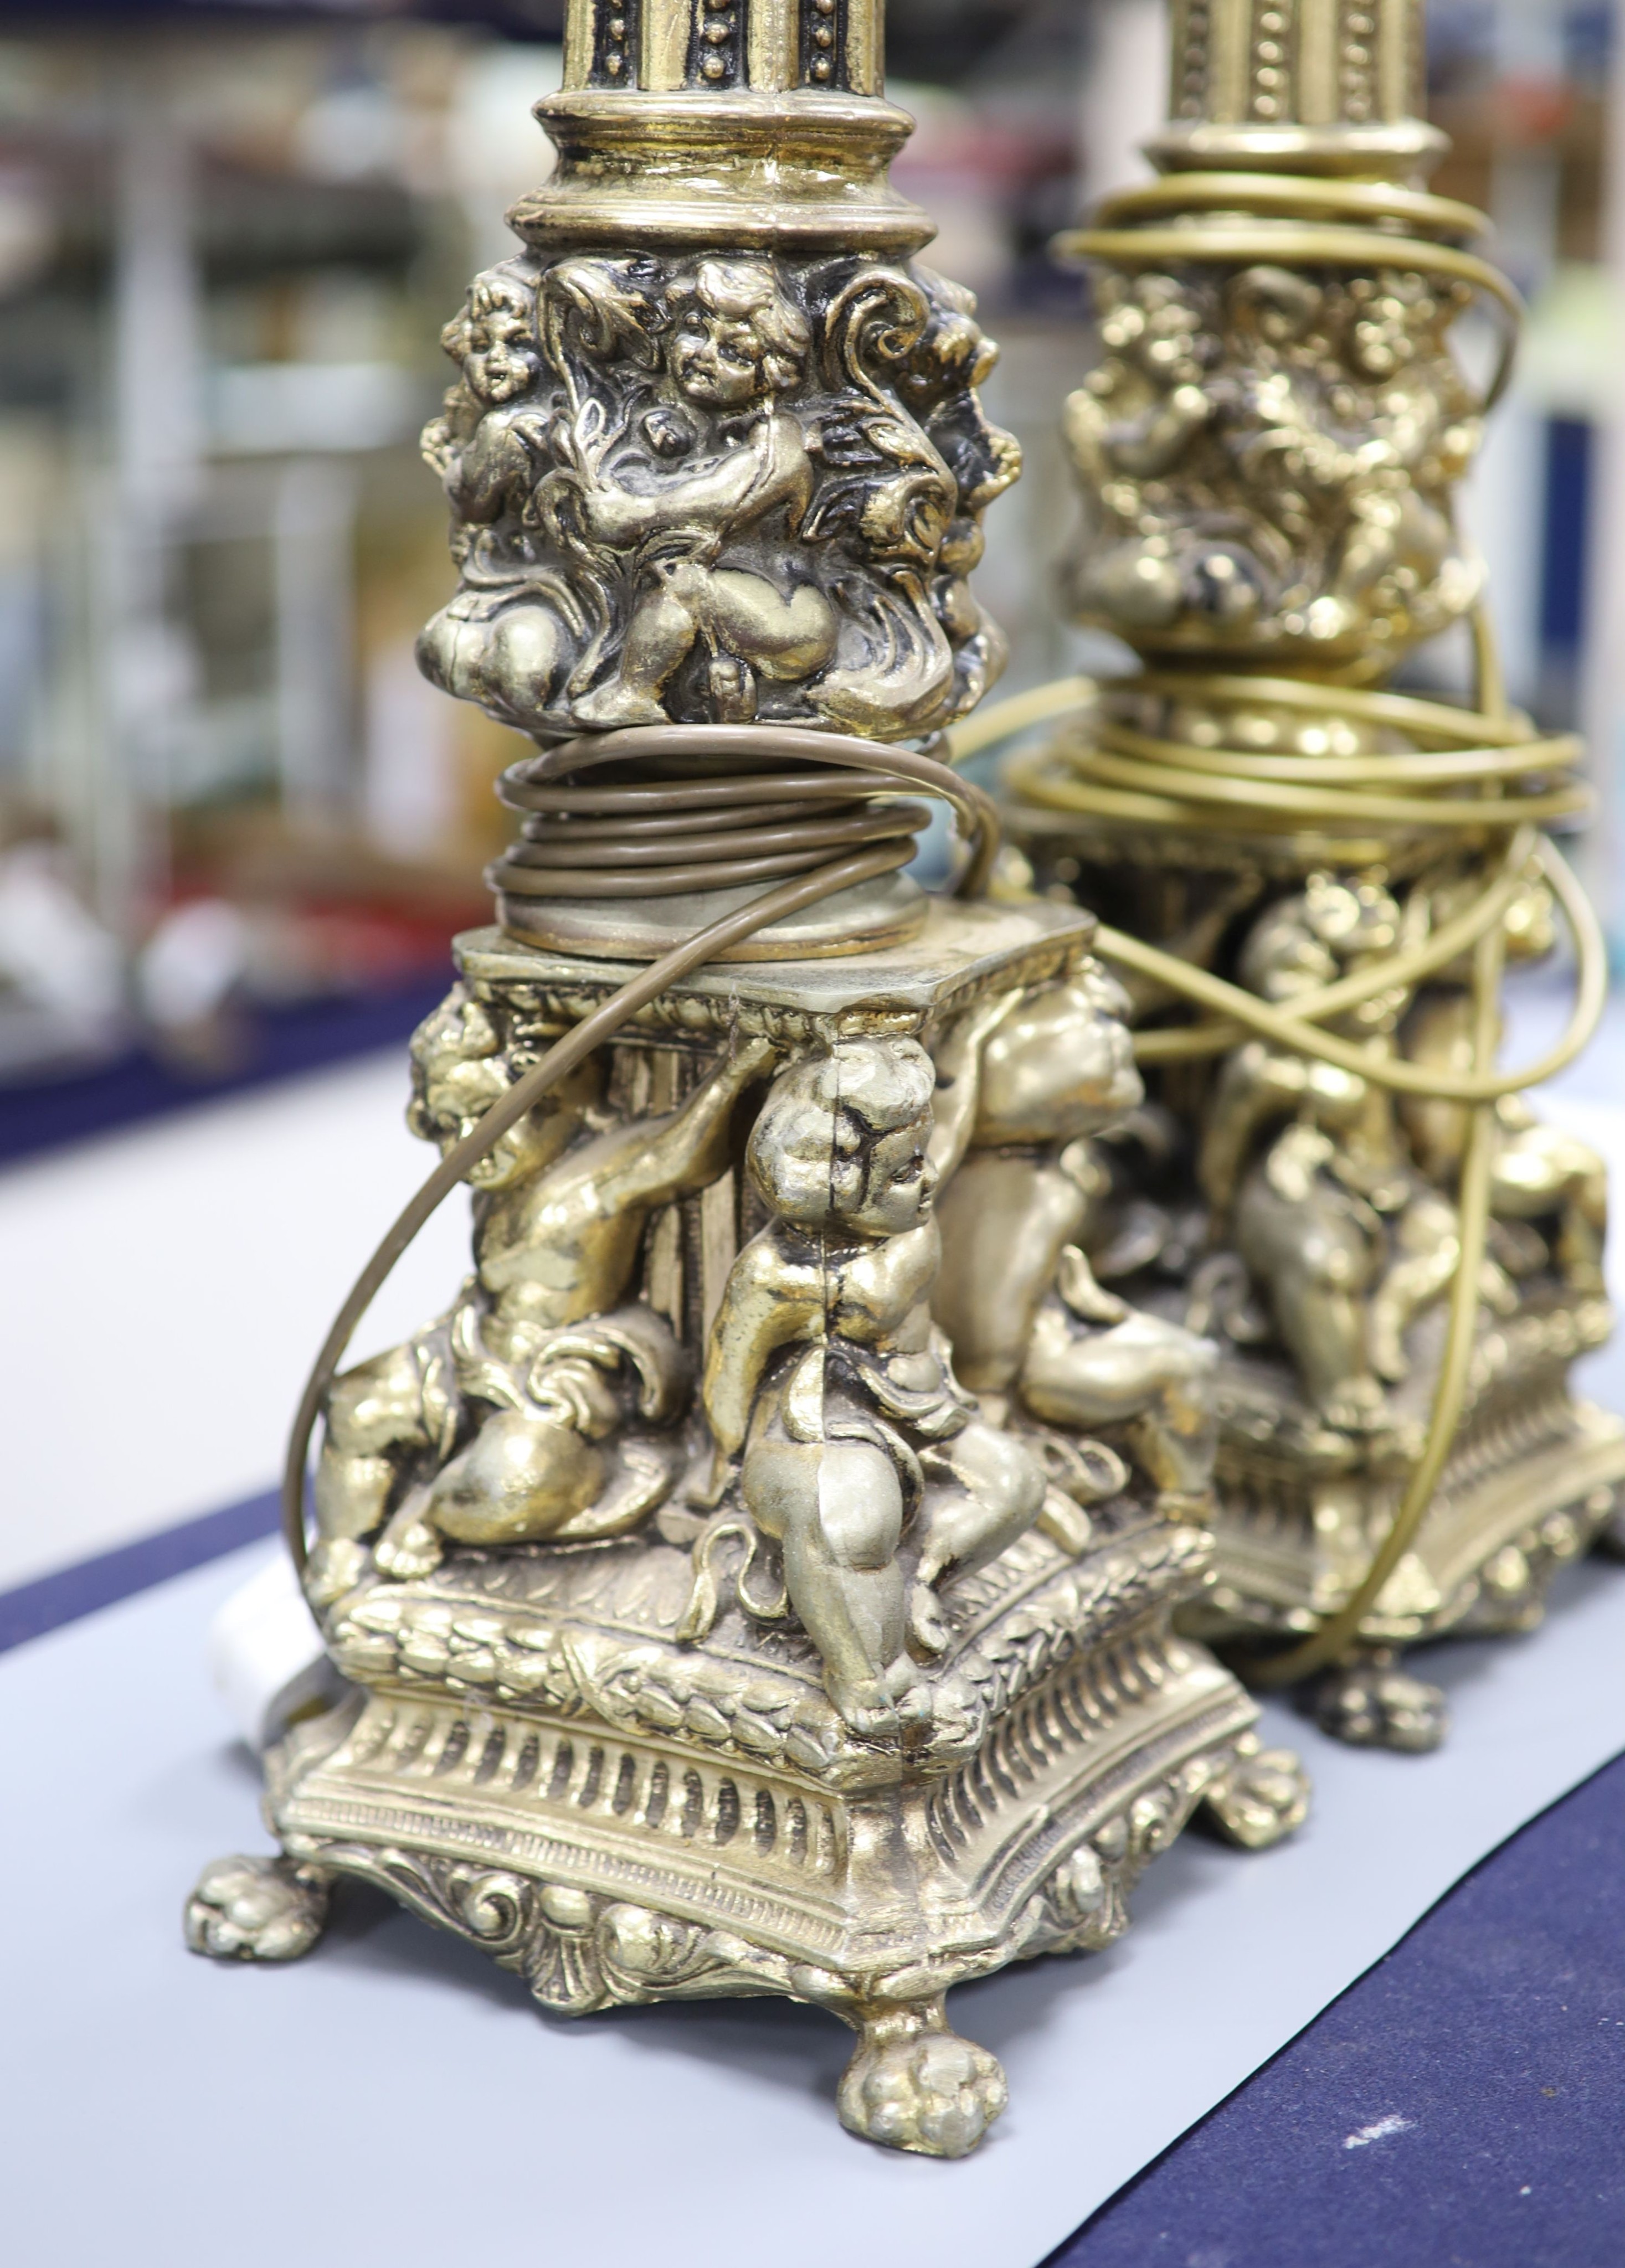 A pair of gilt metal column lamp bases, total height 61 cm